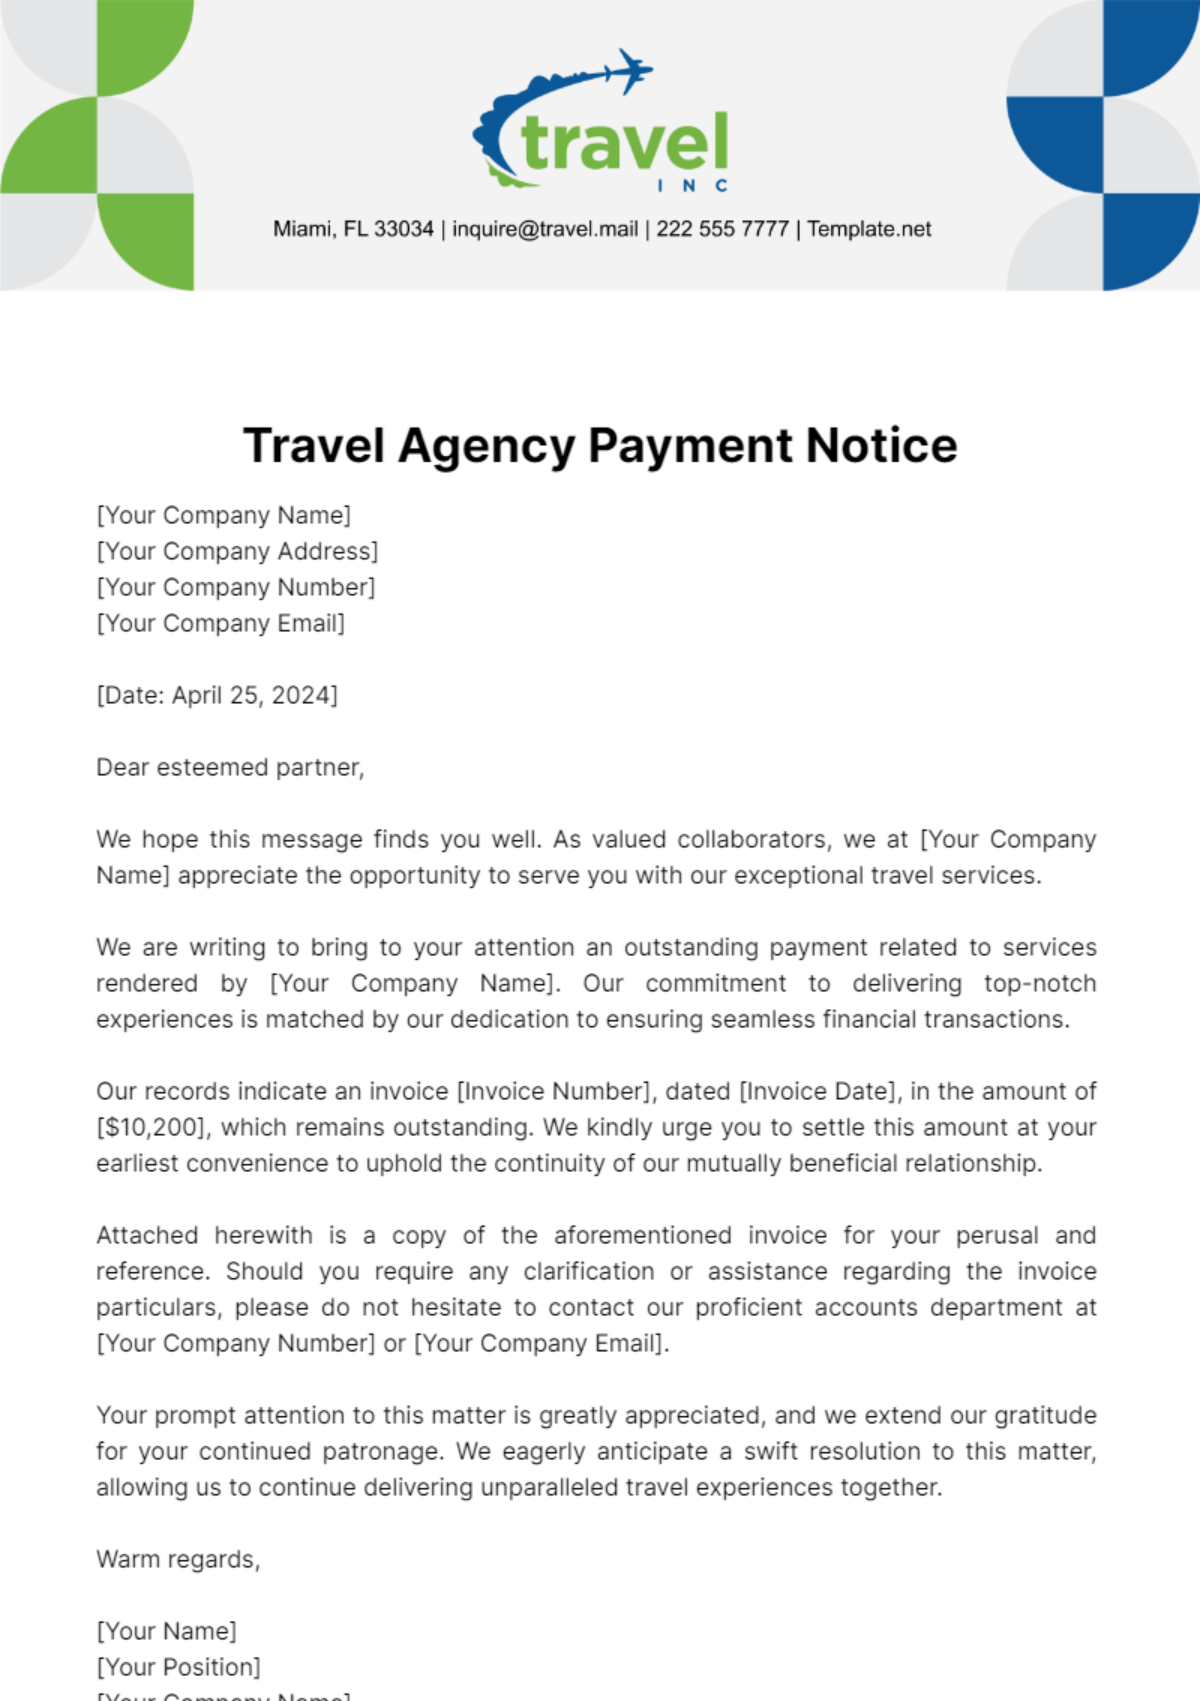 Free Travel Agency Payment Notice Template